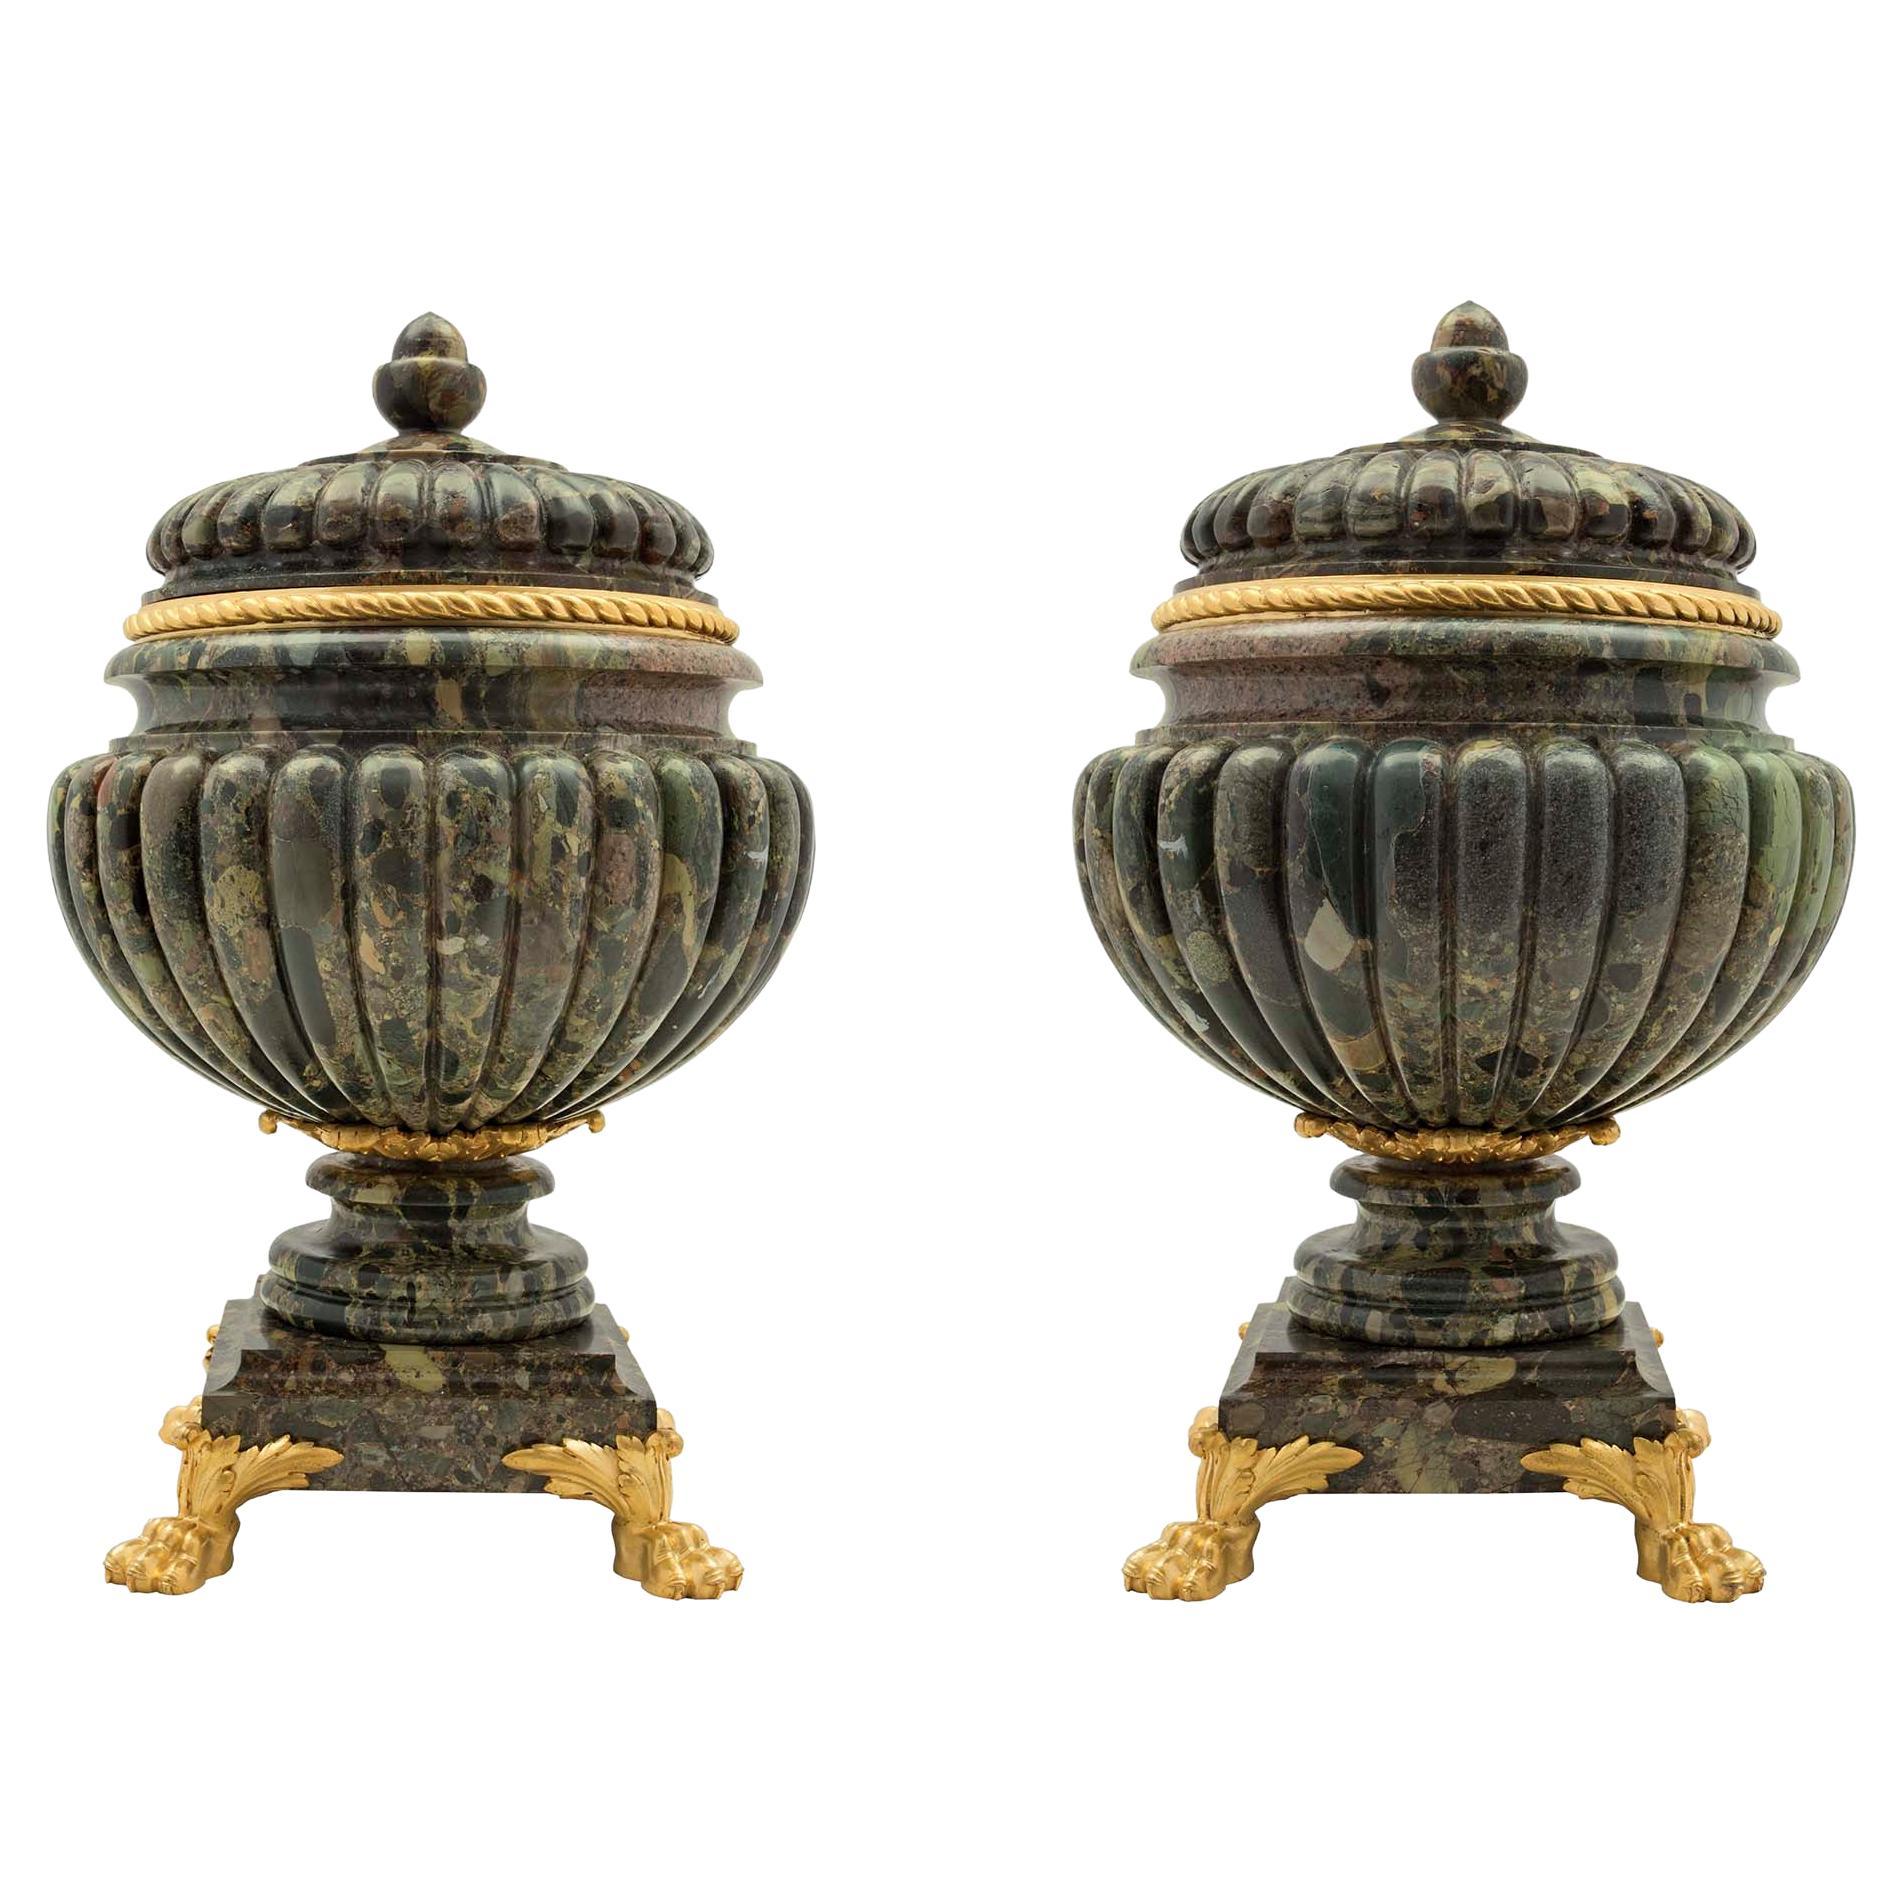 Pair of French 19th Century Neoclassical Style Marble and Ormolu Urns For Sale